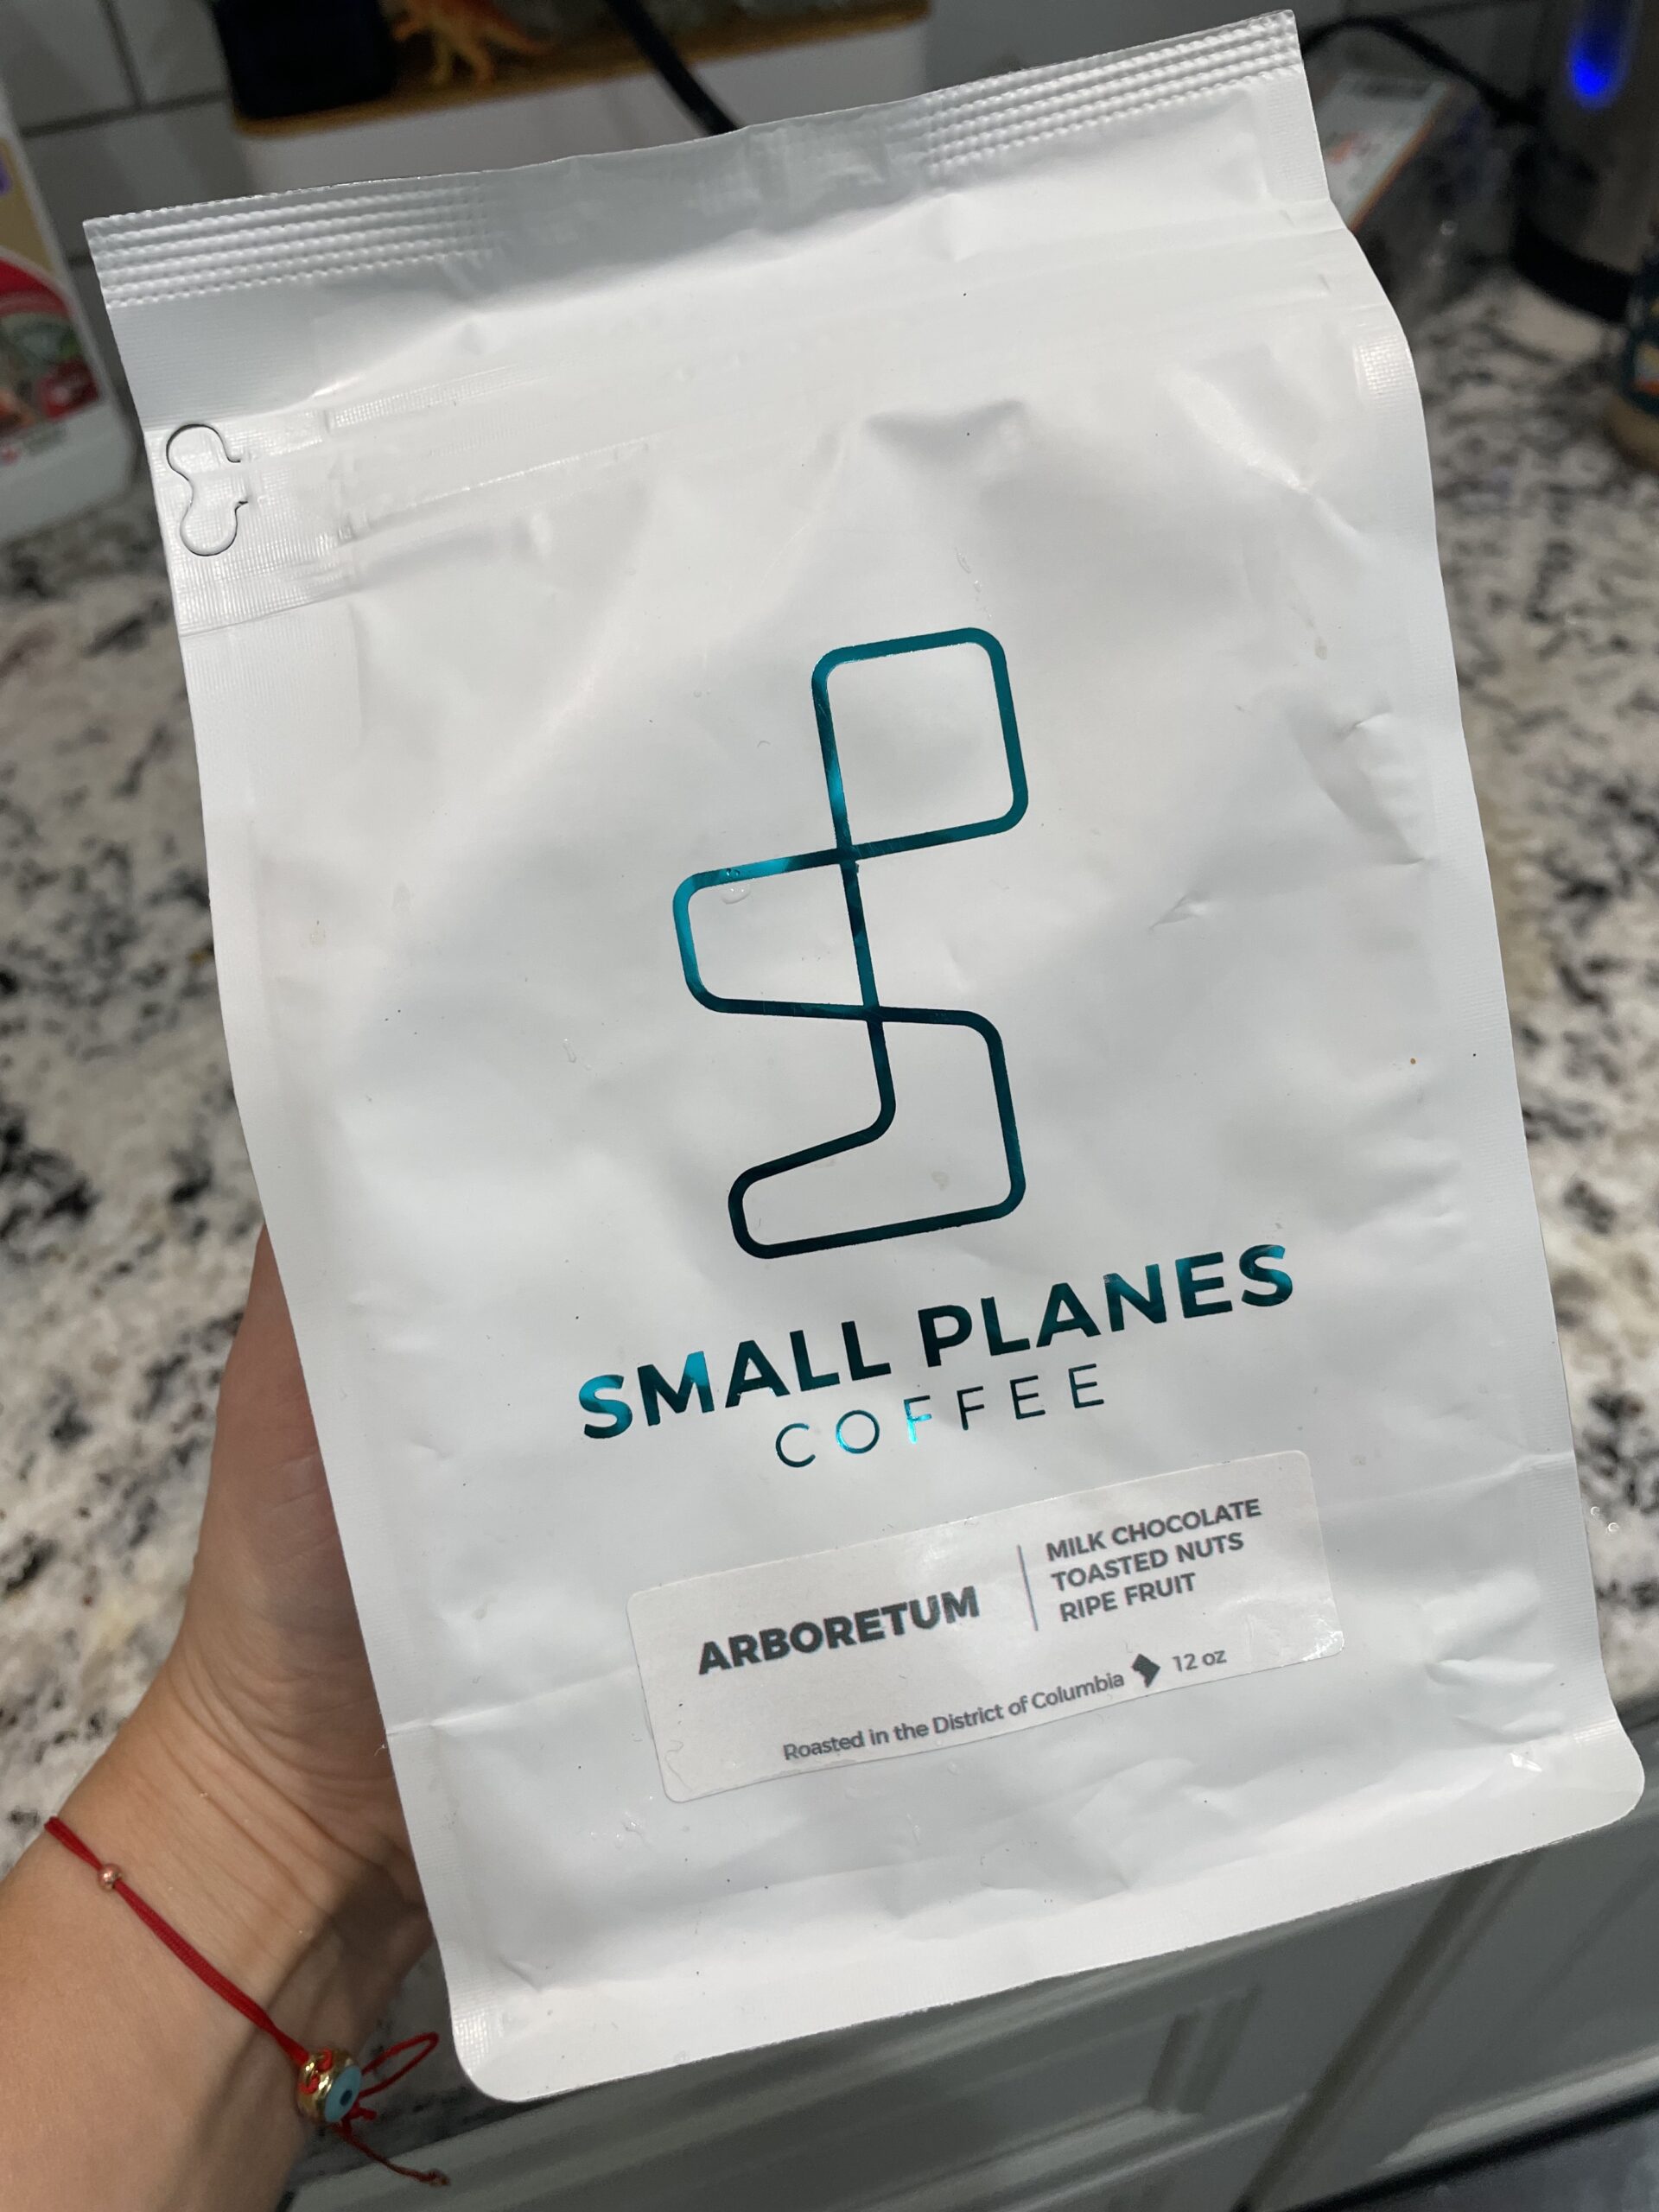 A Bag of Arboretum Roast Coffee from Small Planes Coffee Roasters in Washington, D.C.